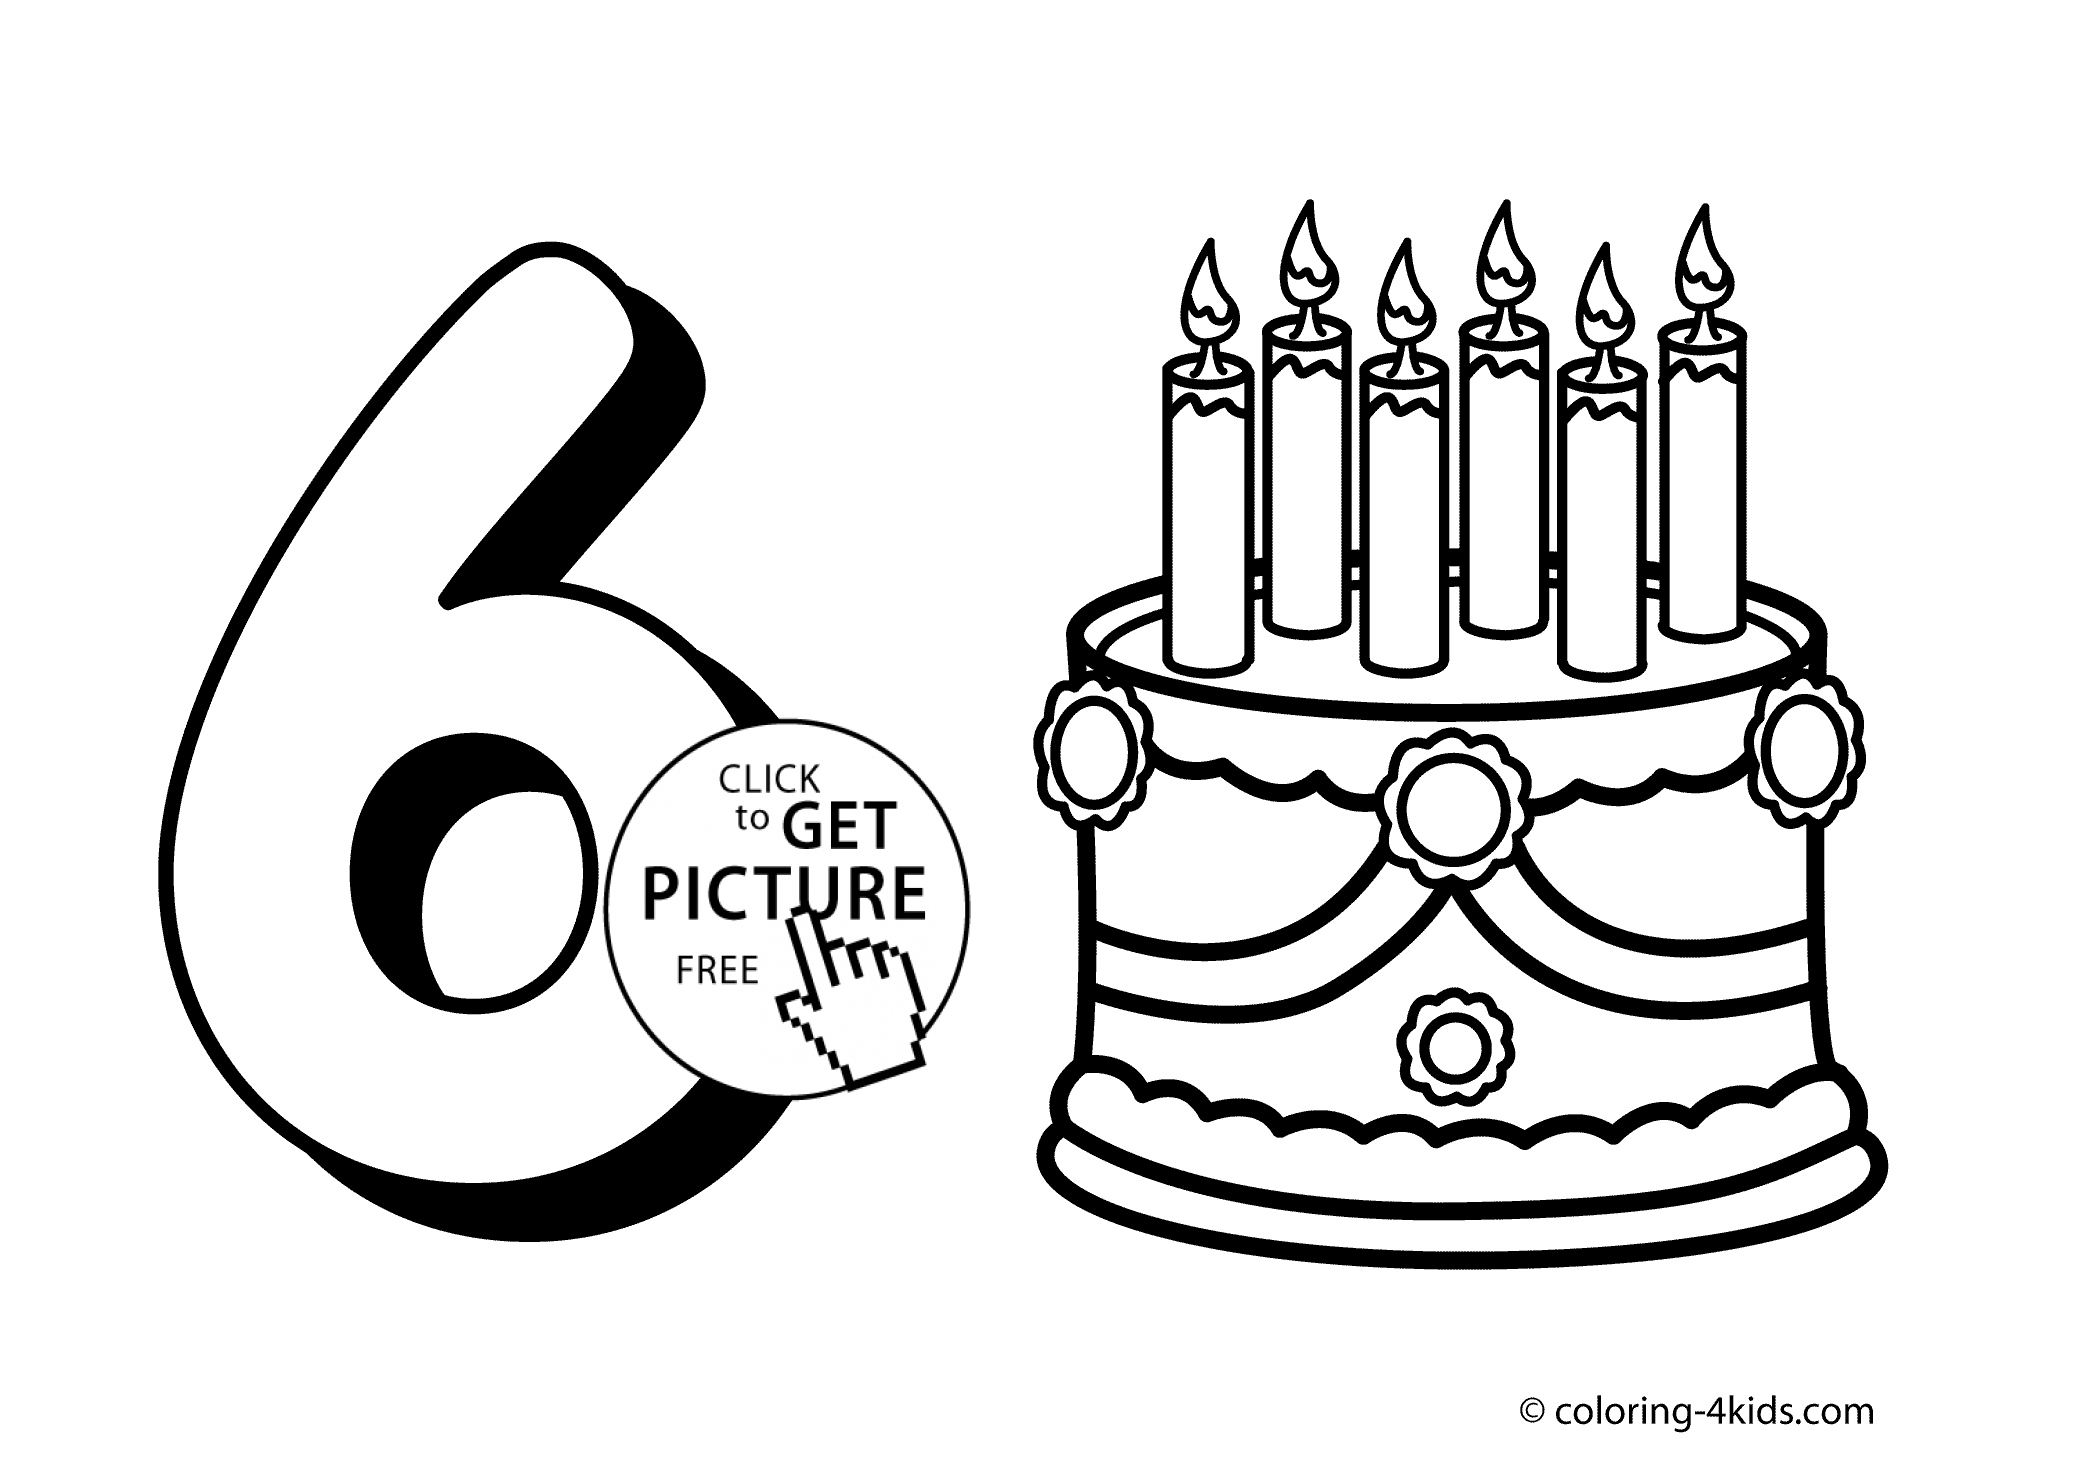 Number 6 Coloring Page 6 Numbers Coloring Pages For Kids Printable Free Digits Coloring